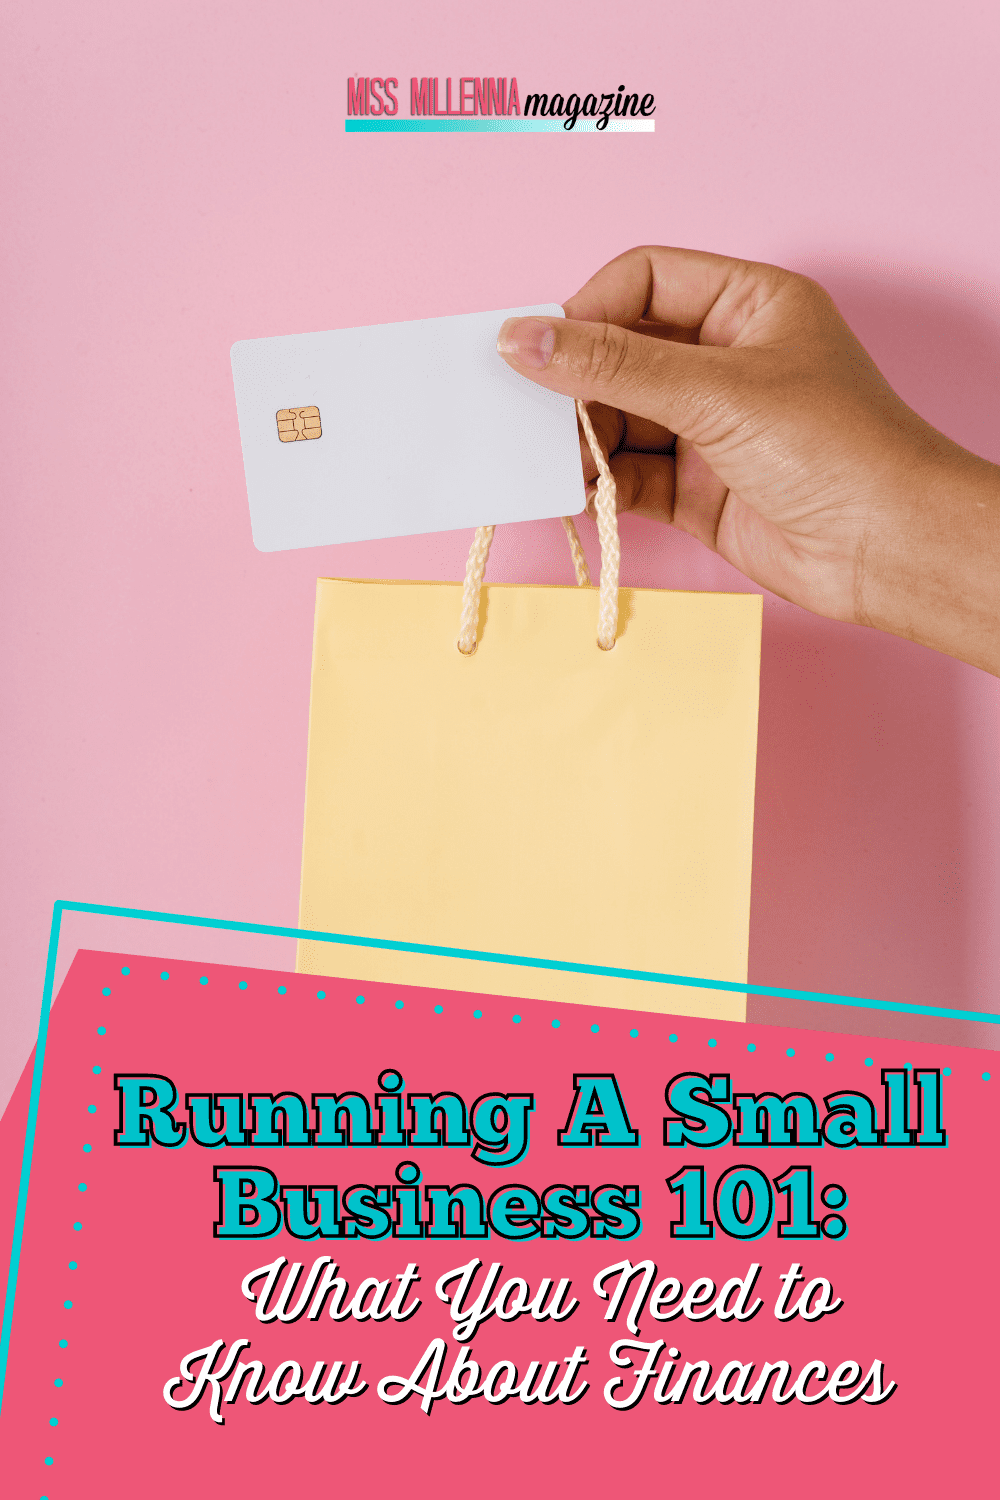 Running A Small Business 101: What You Need to Know About Finances